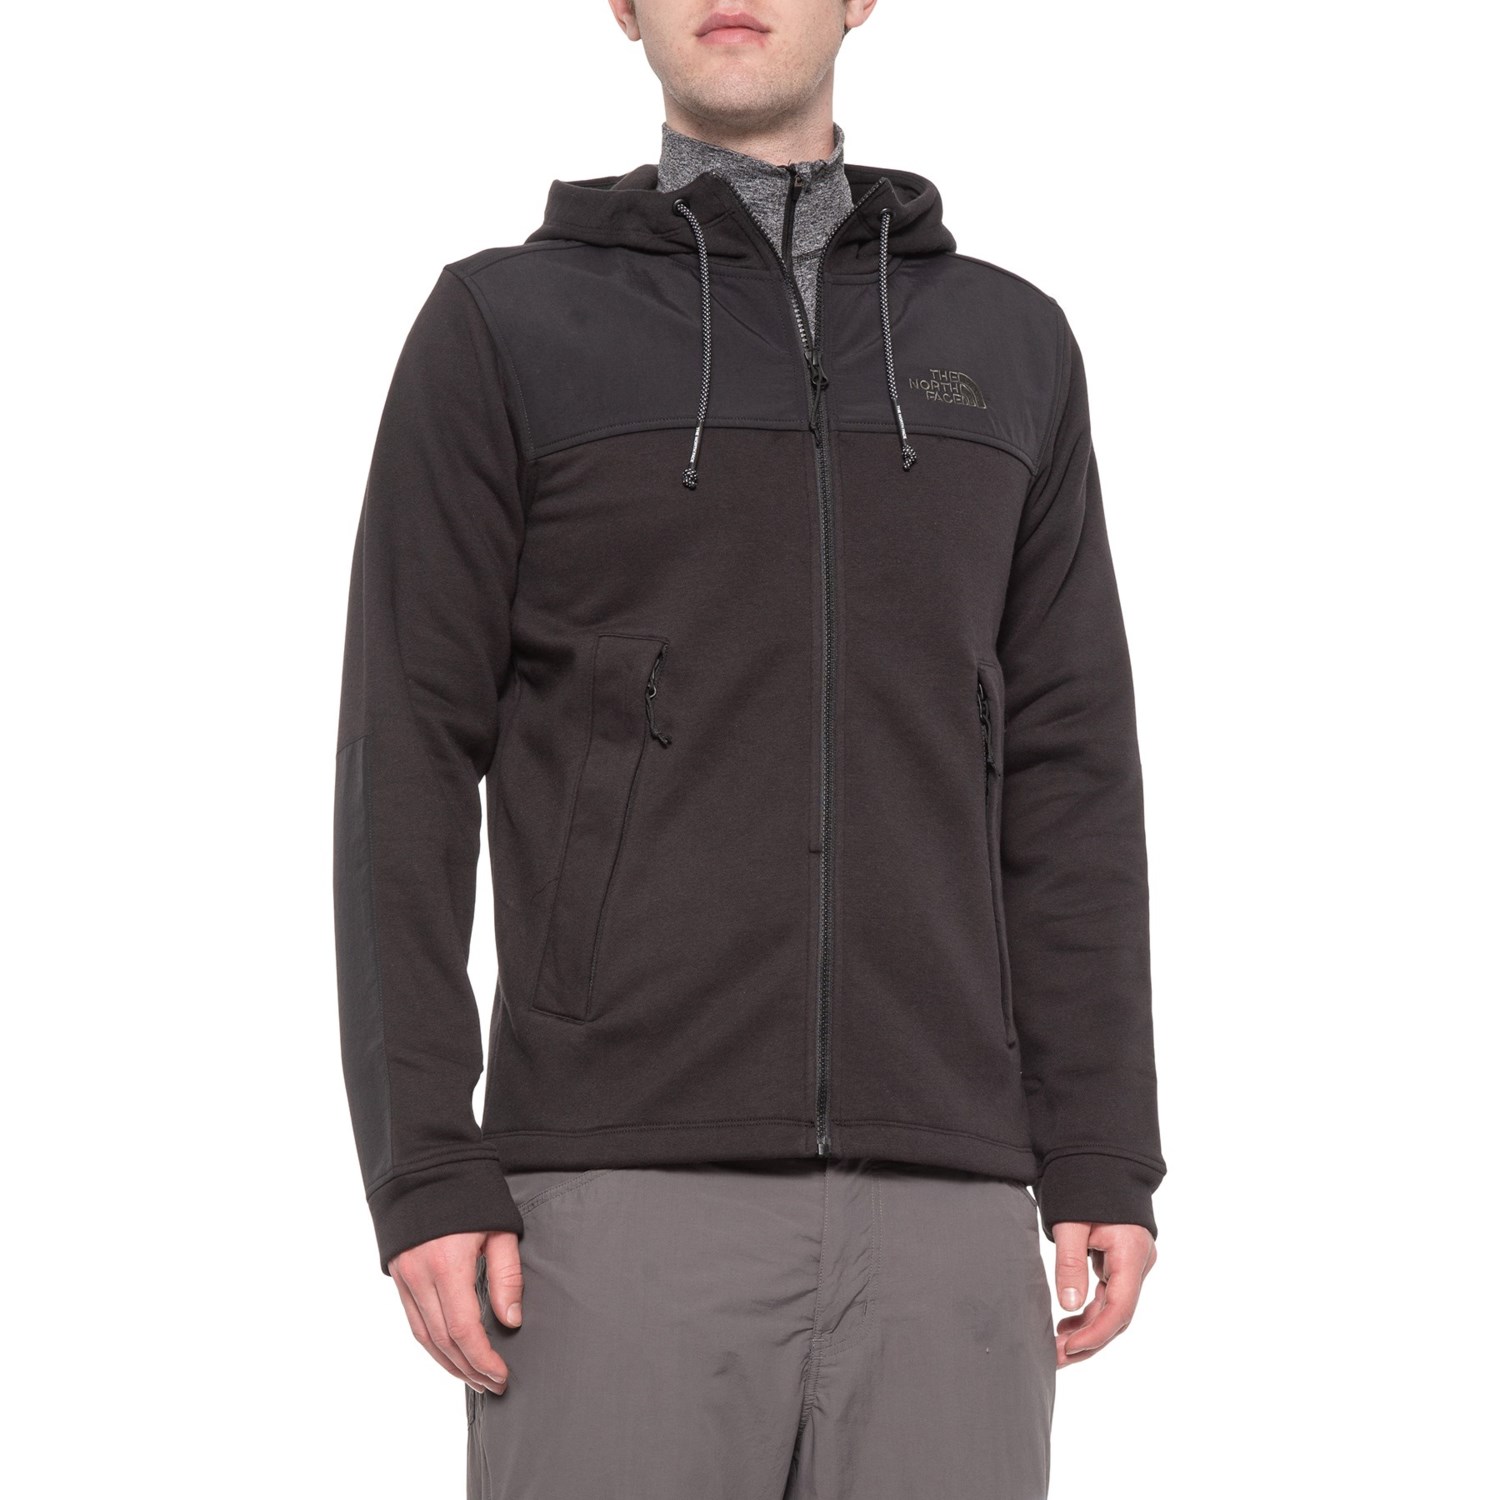 The North Face ABC Fleece Hoodie (For Men)